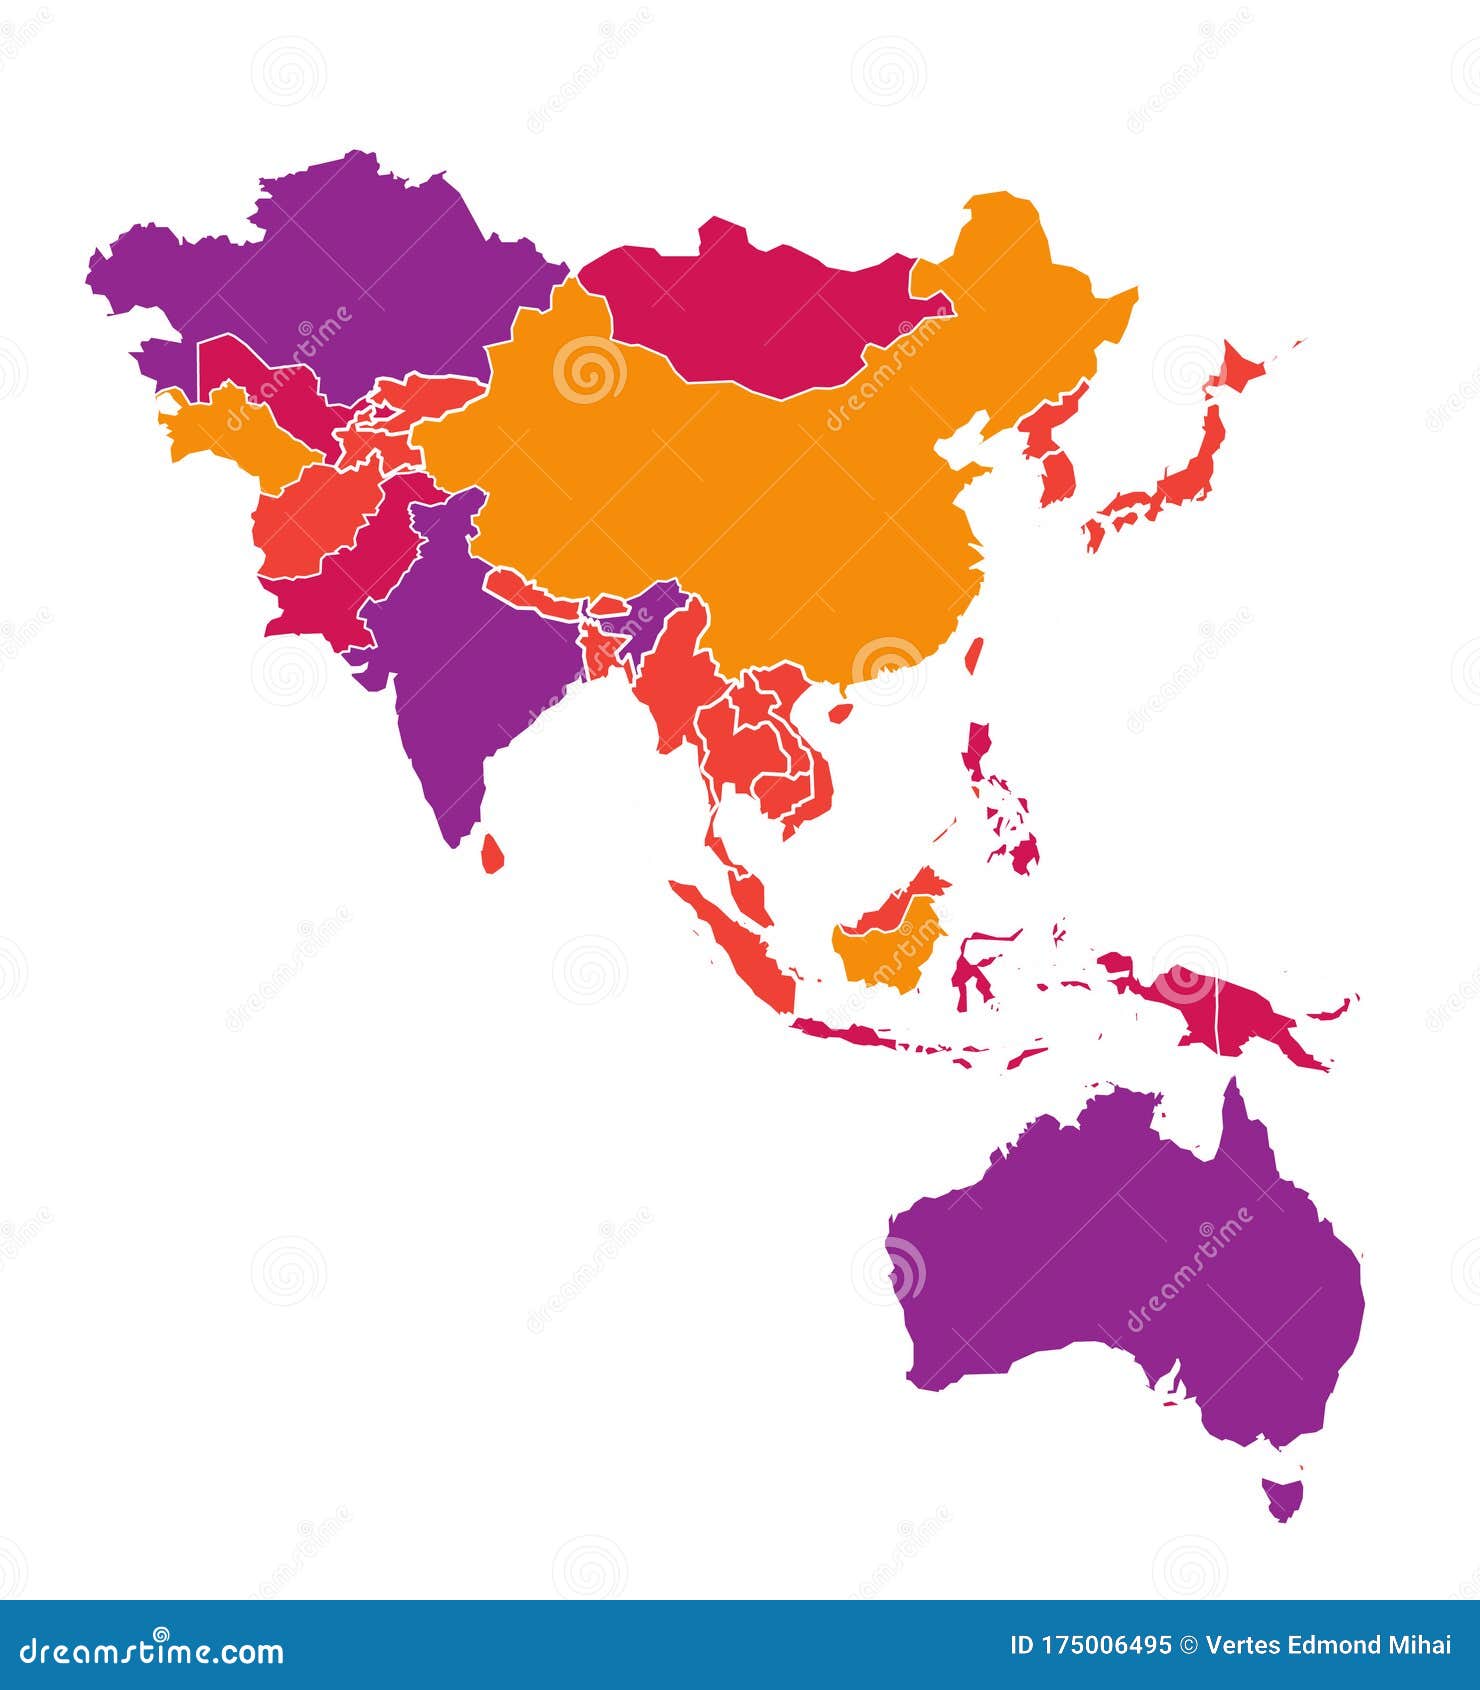 Asia Pacific Map Stock Illustrations – 5,613 Asia Pacific Map Stock Illustrations, Vectors & Clipart - Dreamstime